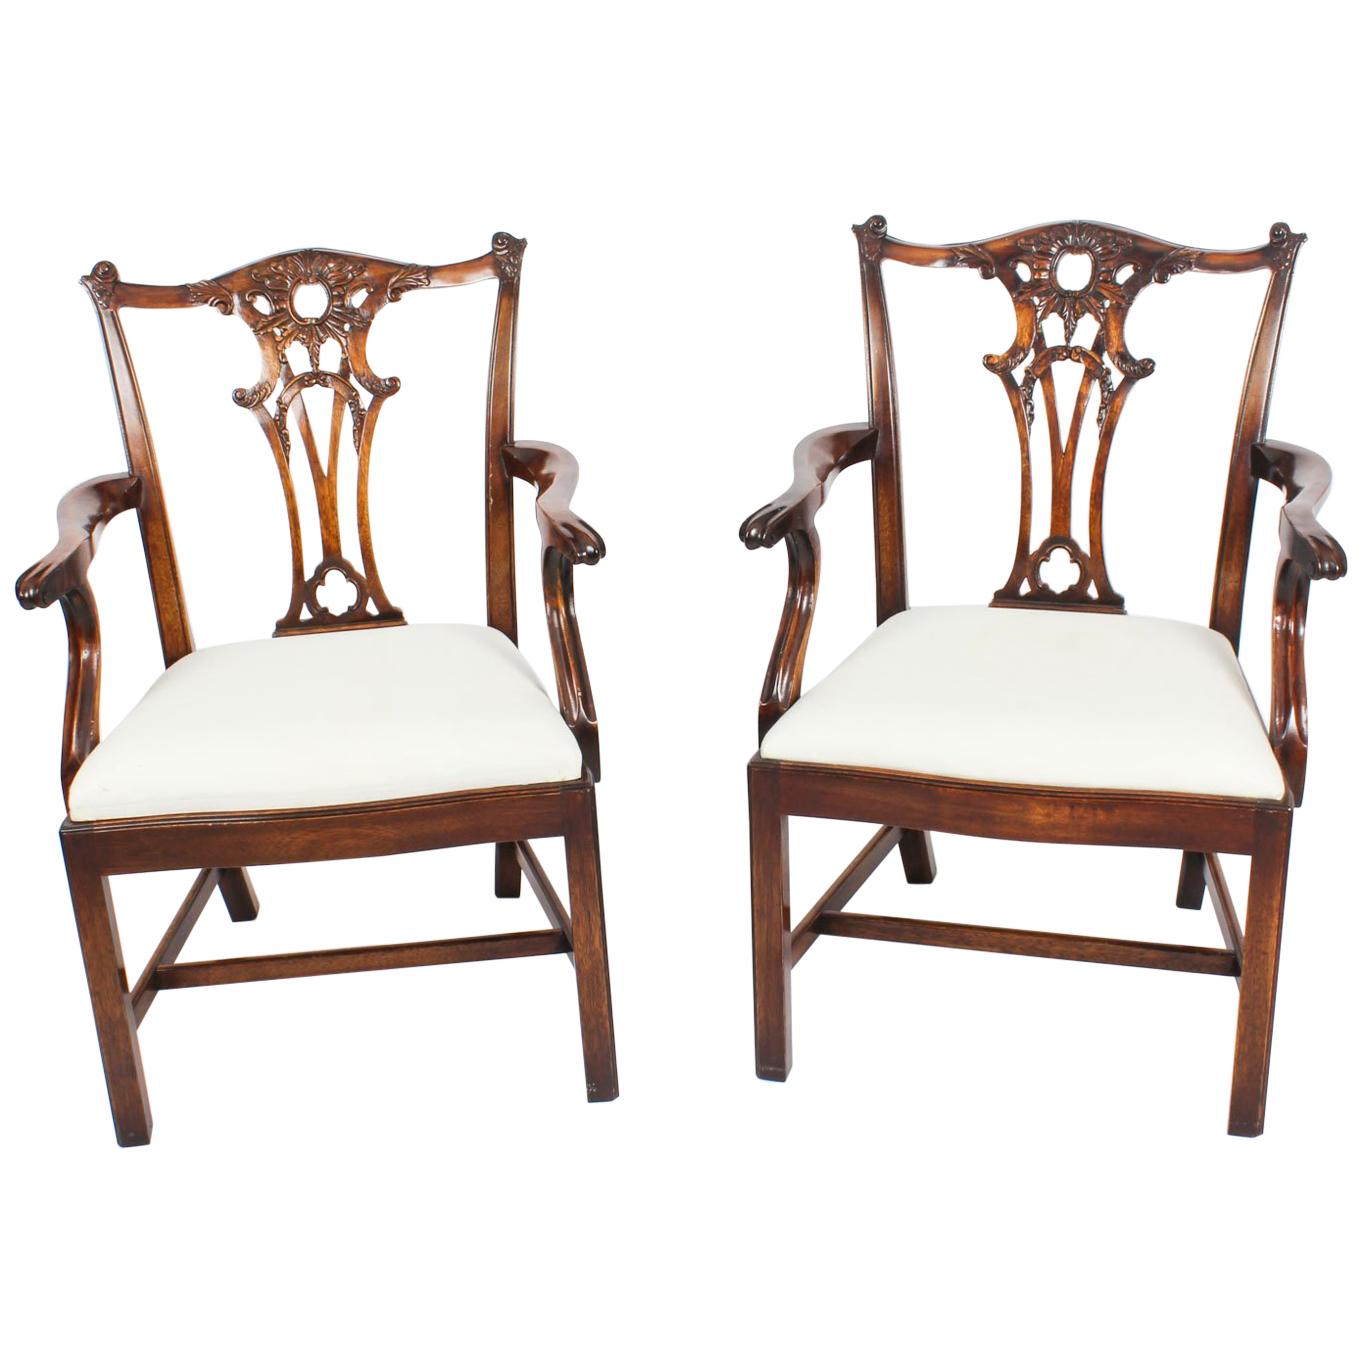 Vintage Pair of Mahogany Chippendale Revival Armchairs, Mid-20th Century